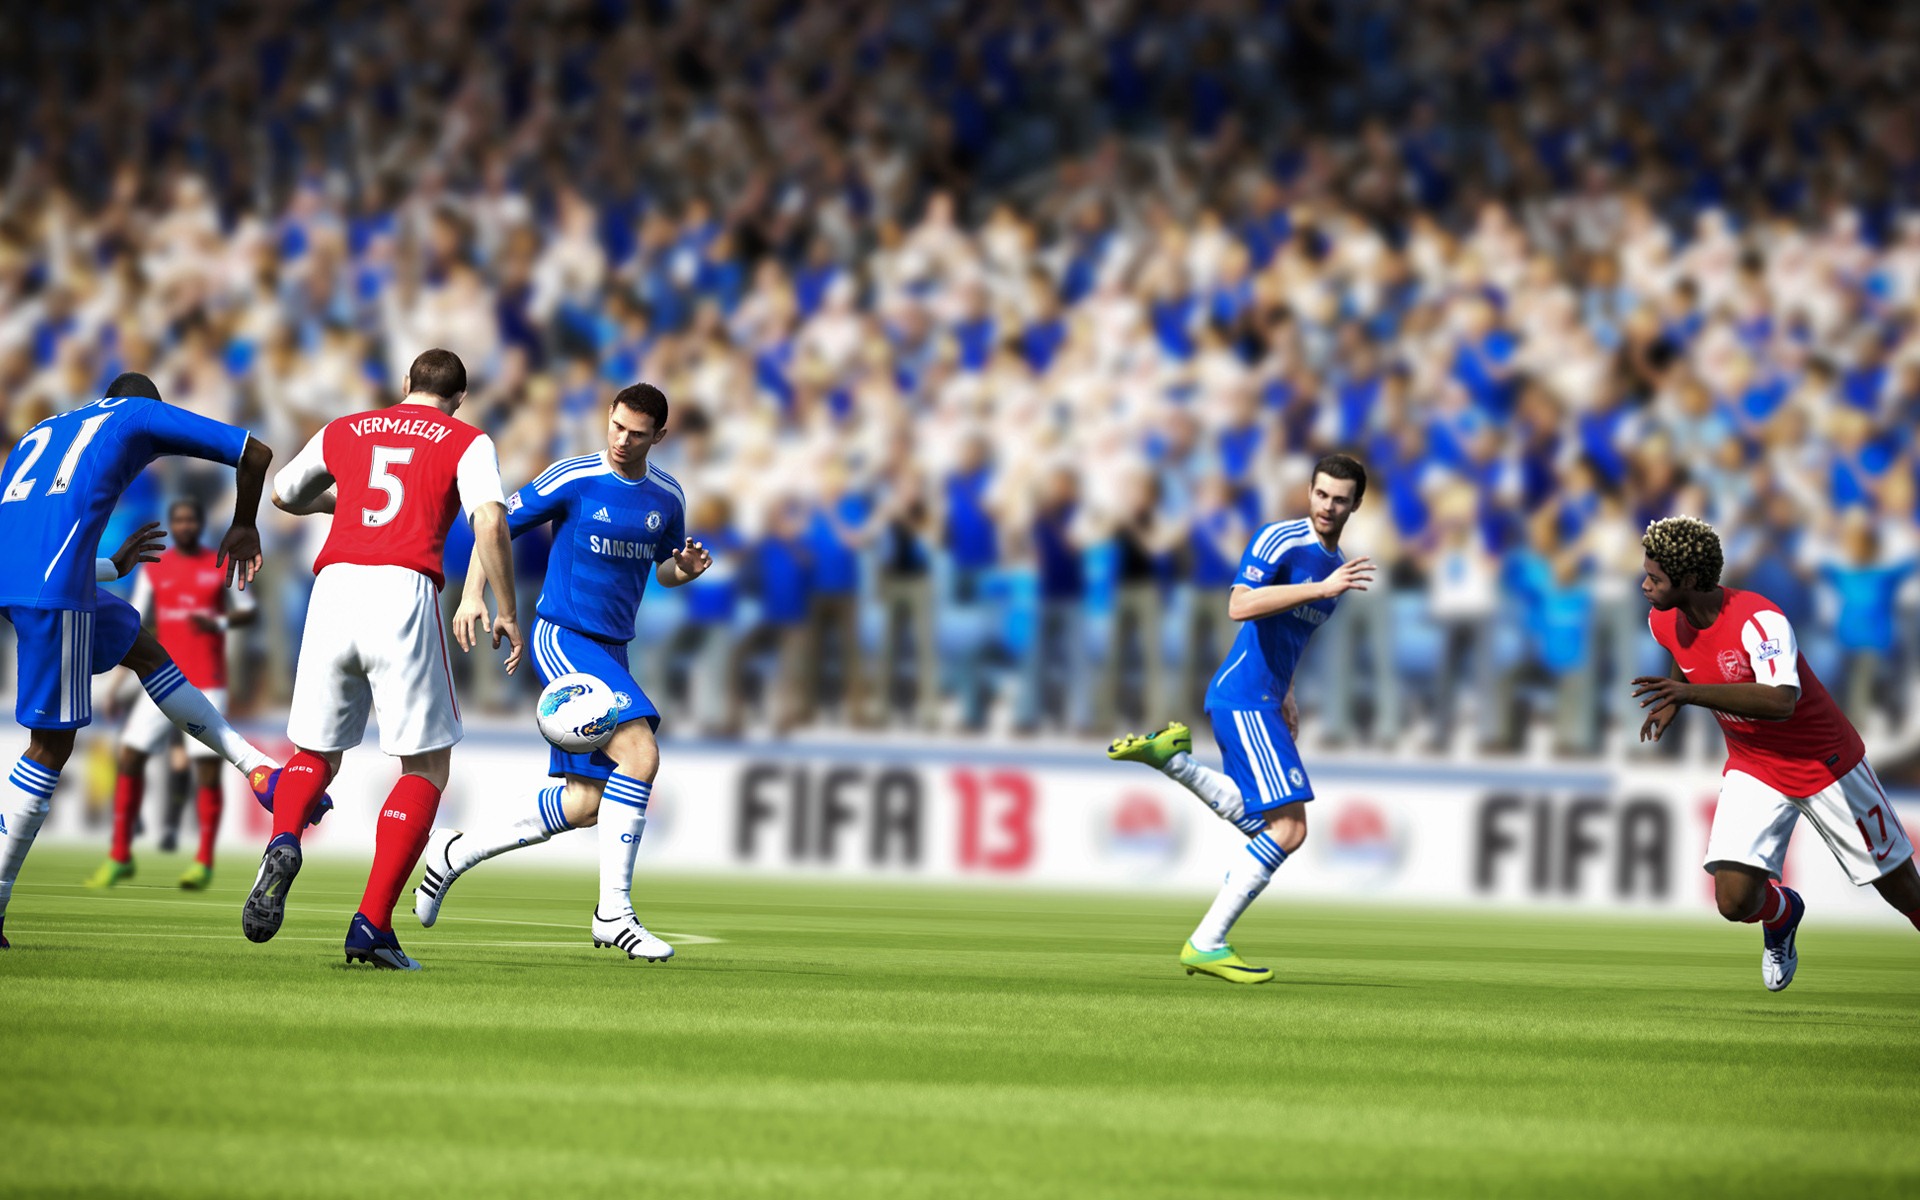 FIFA 13 game HD wallpapers #13 - 1920x1200